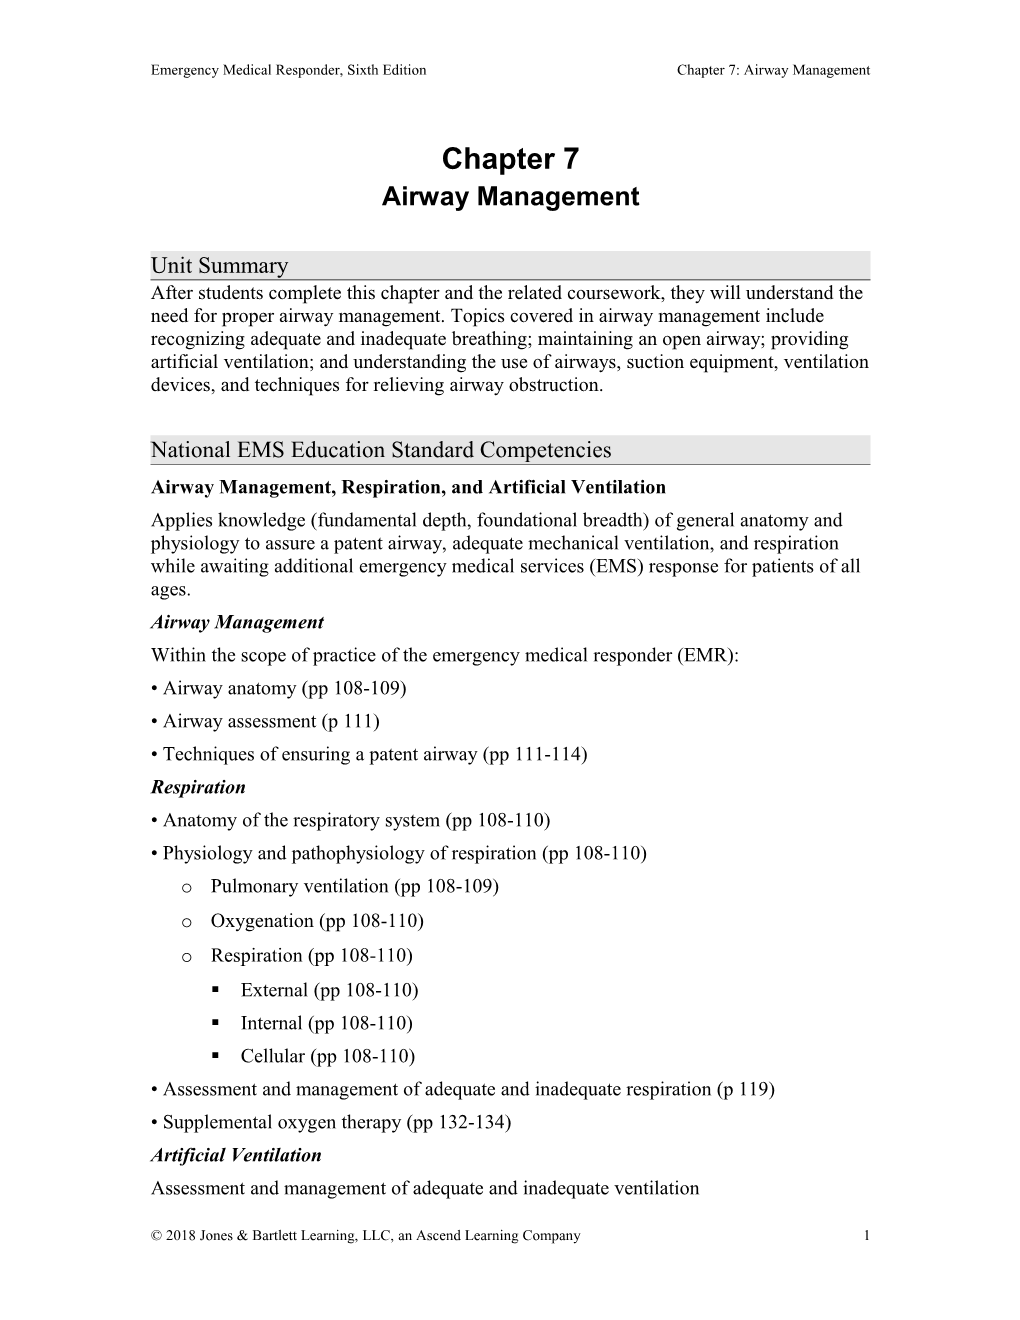 Emergency Medical Responder, Sixtheditionchapter 7: Airway Management